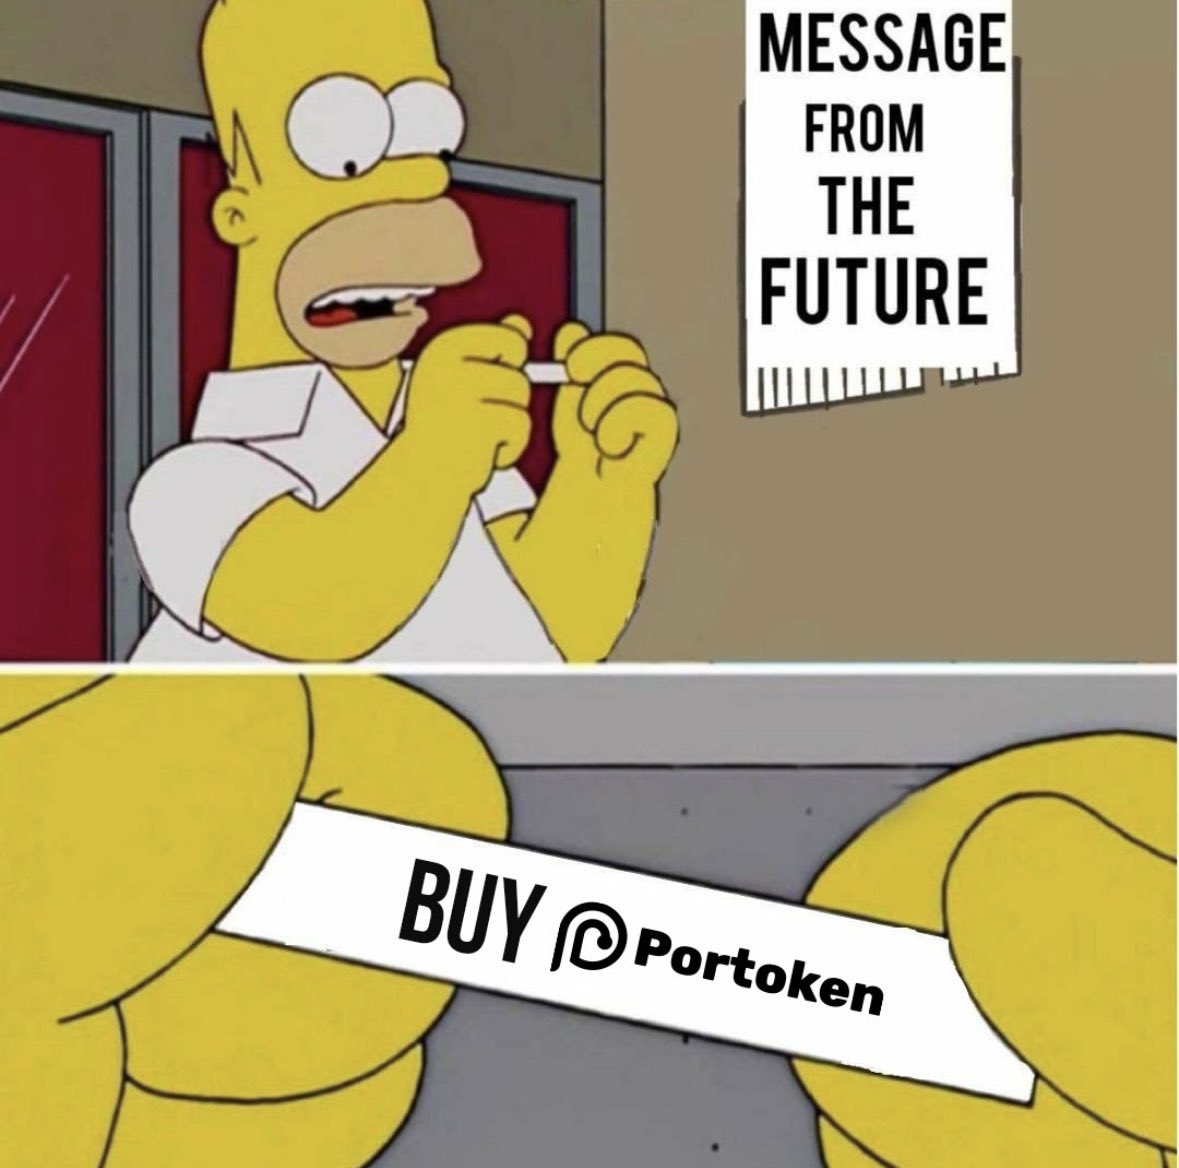 The Simpsons... We guessed you saw the future, now we're sure! We know Homer Simpson had plenty of Portoken in his wallet 🤫😎🚀